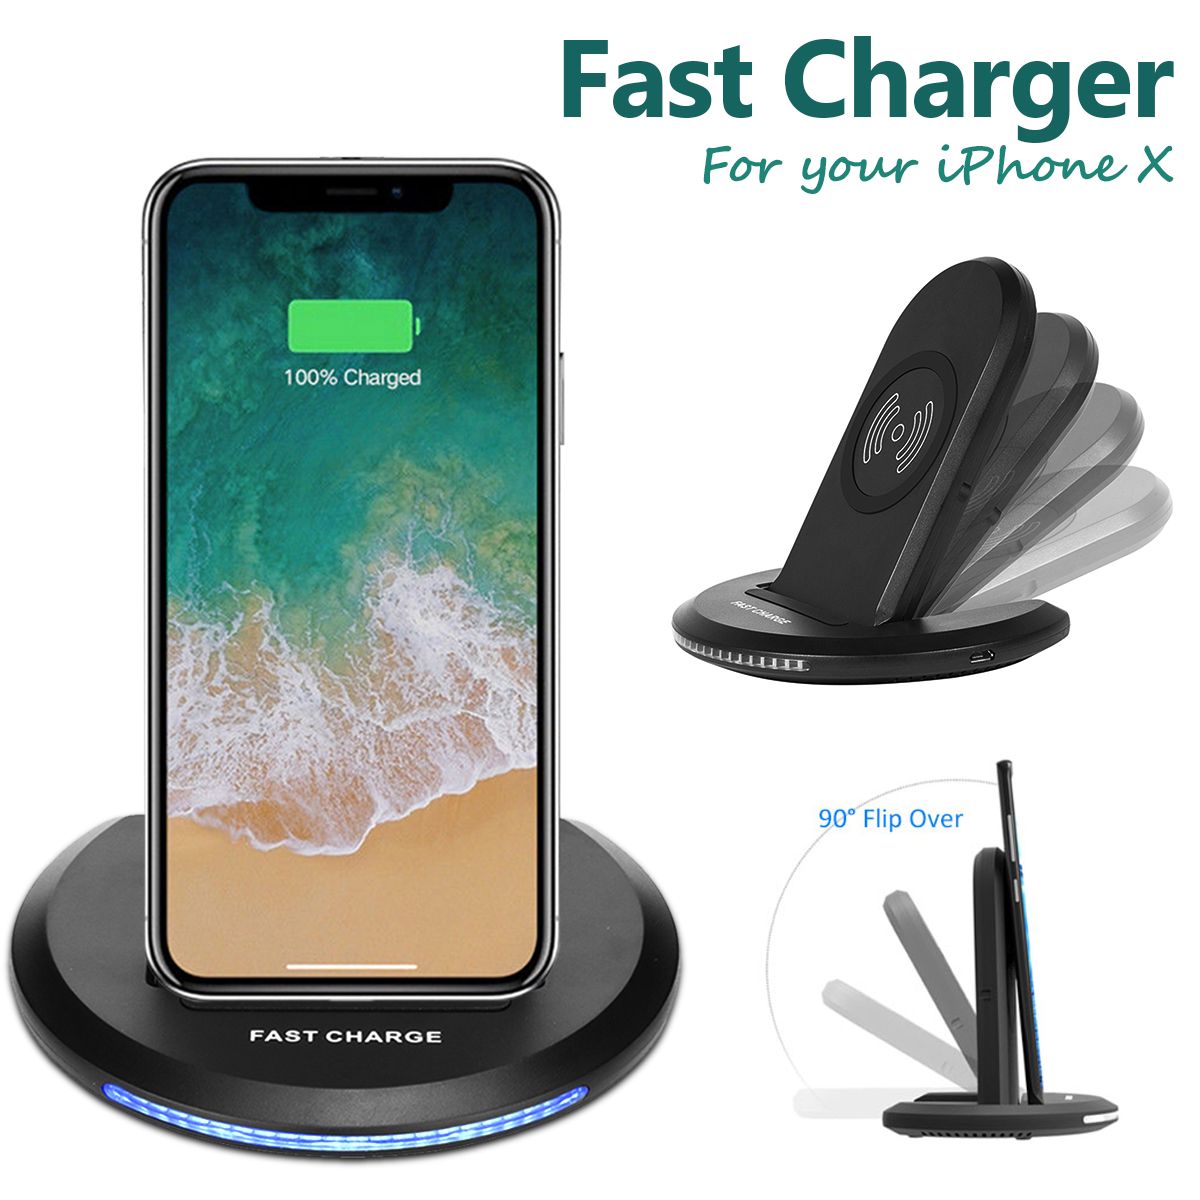 Qi-Wireless-Dual-Coils-Fast-Charger-with-Holder-for-iPhone-X-8-Samsung-8-1227782